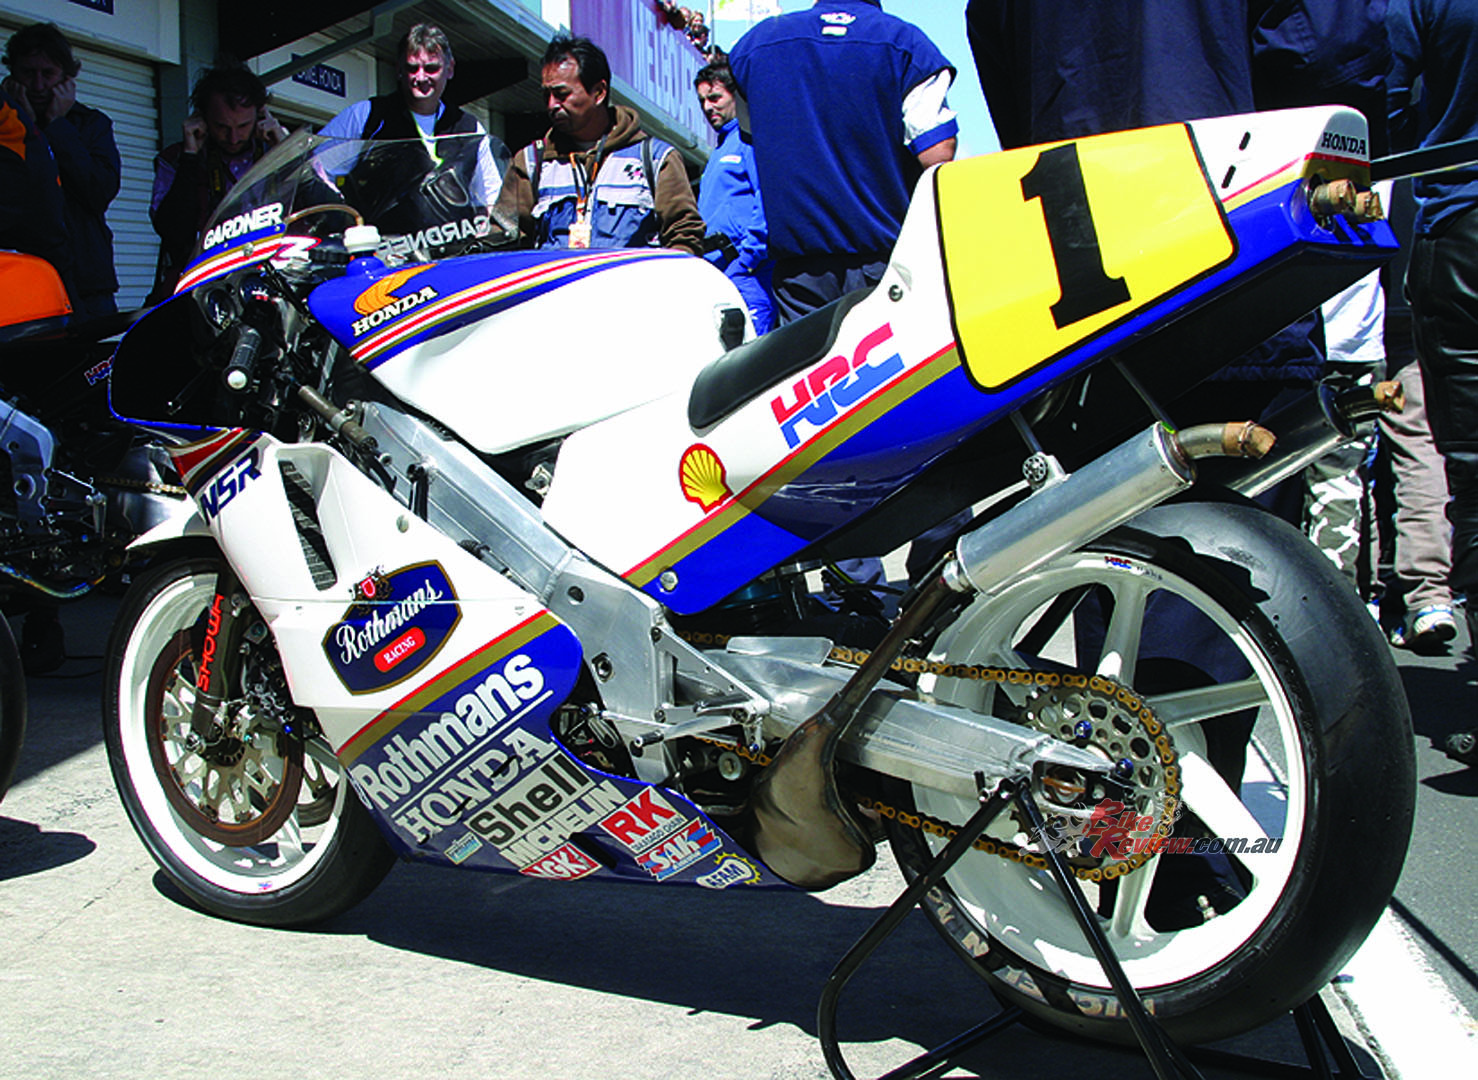 It's hard to pick which bike has a more iconic livery, the Rothmans Honda blue/white combo is easily the most defining colour schemes of the 80s and early 90s.